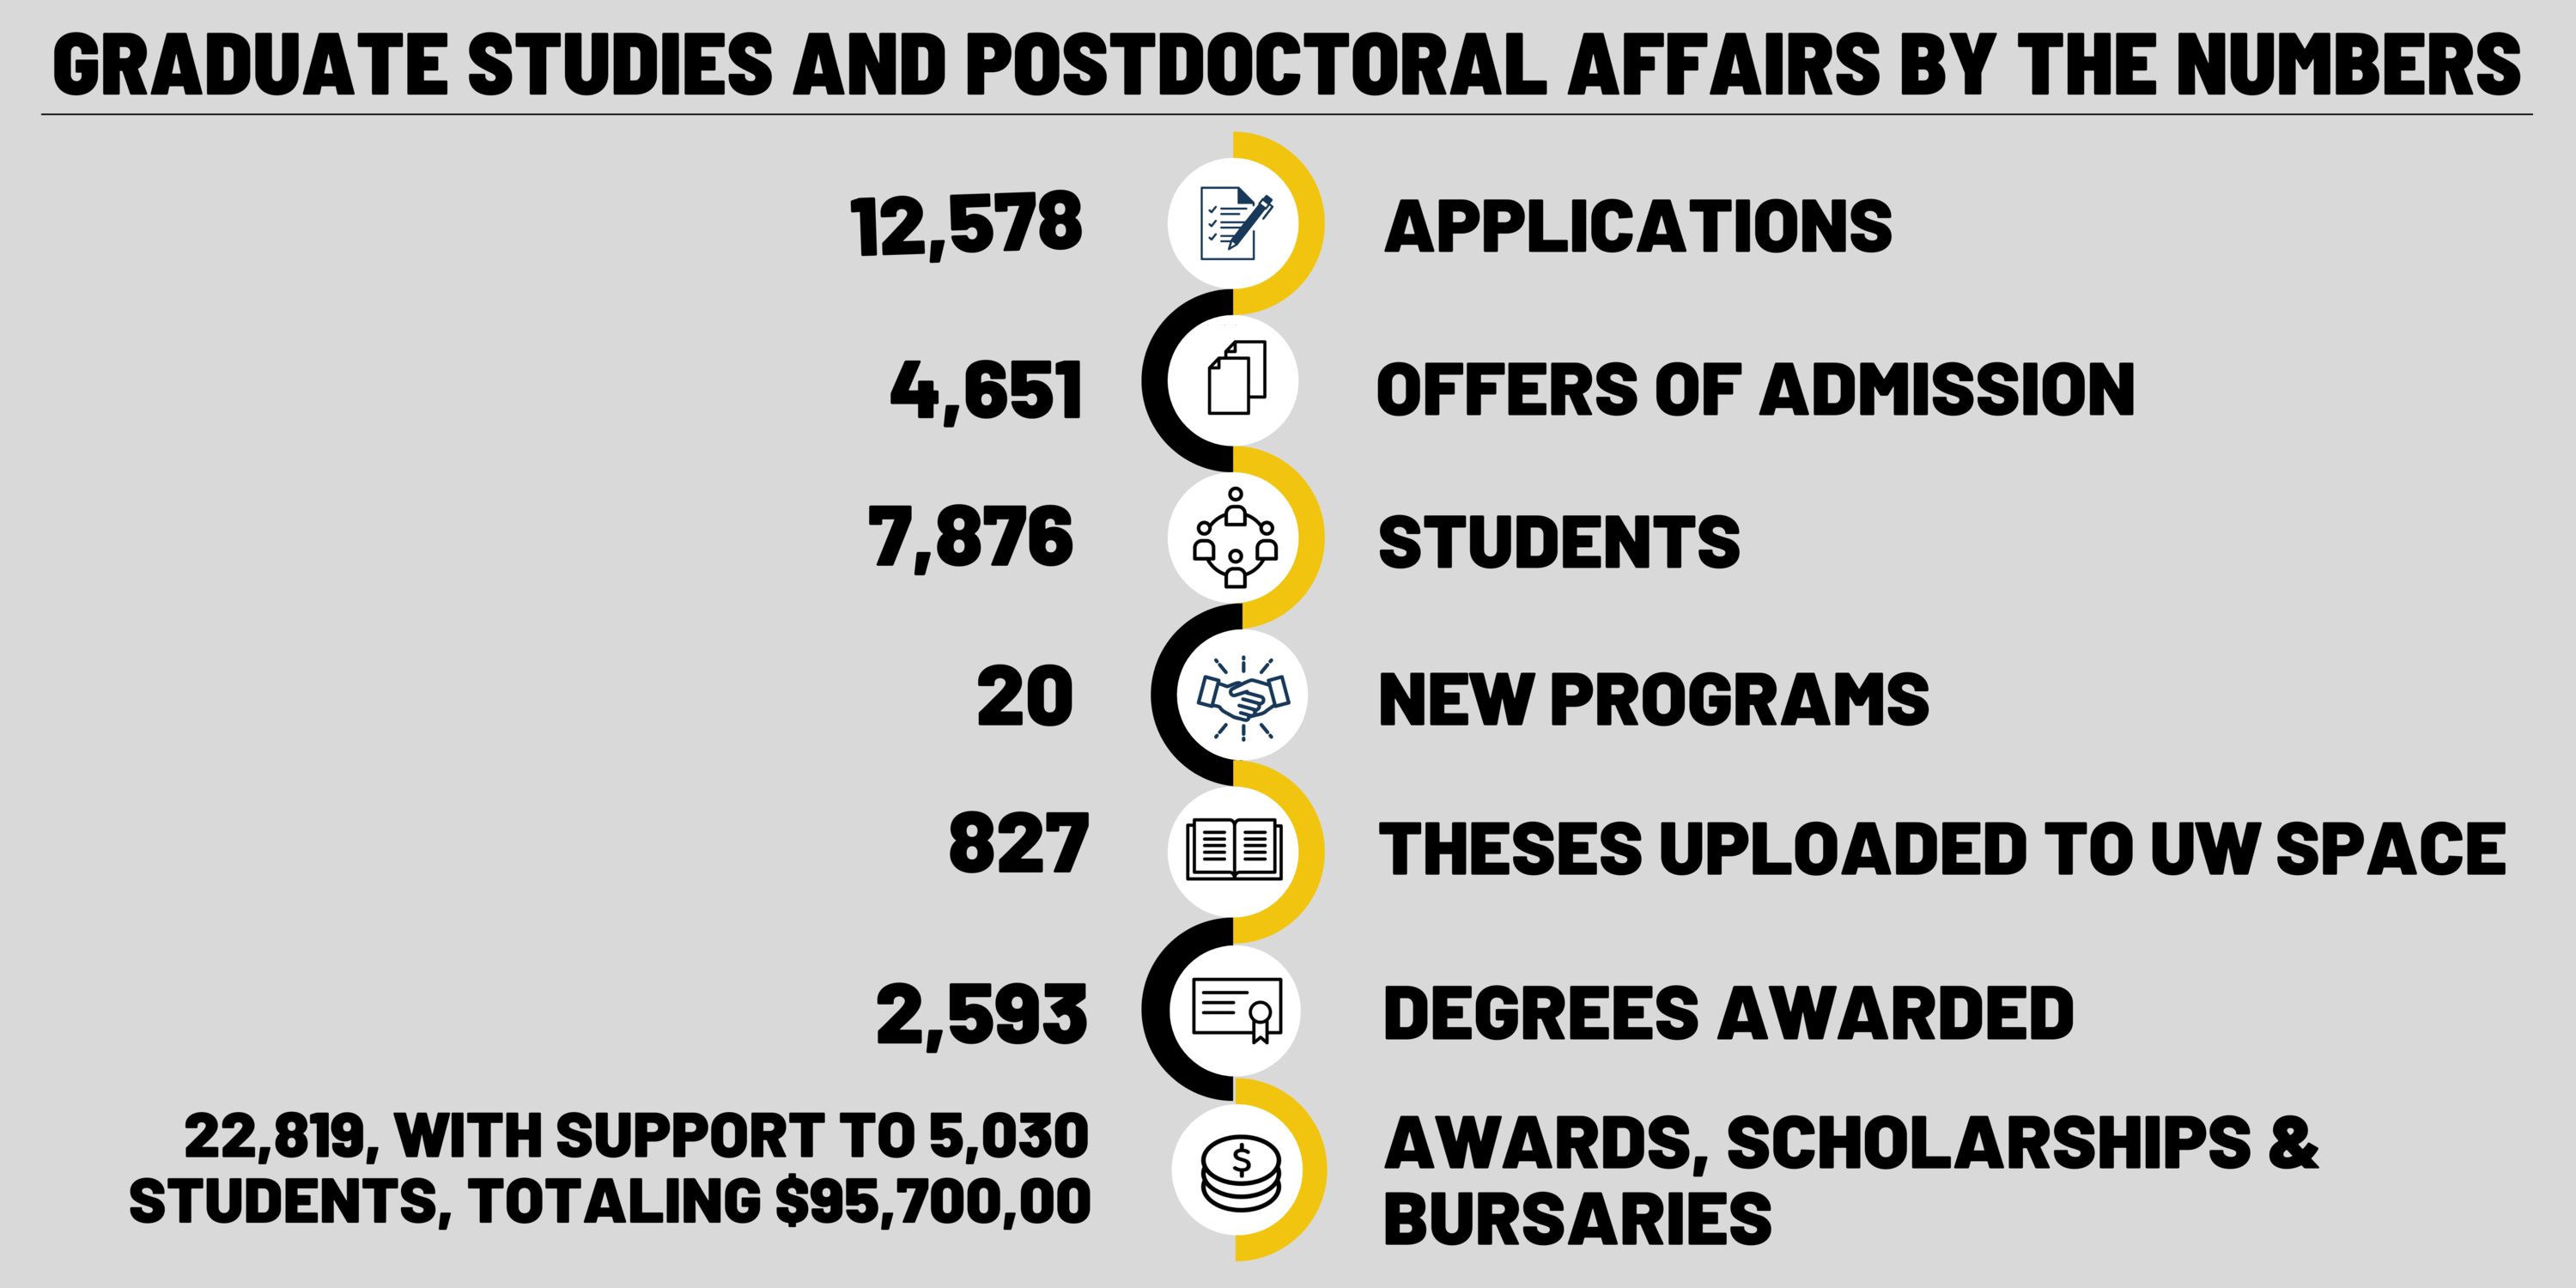 Graduate Studies and Postdoctoral Affairs by the numbers